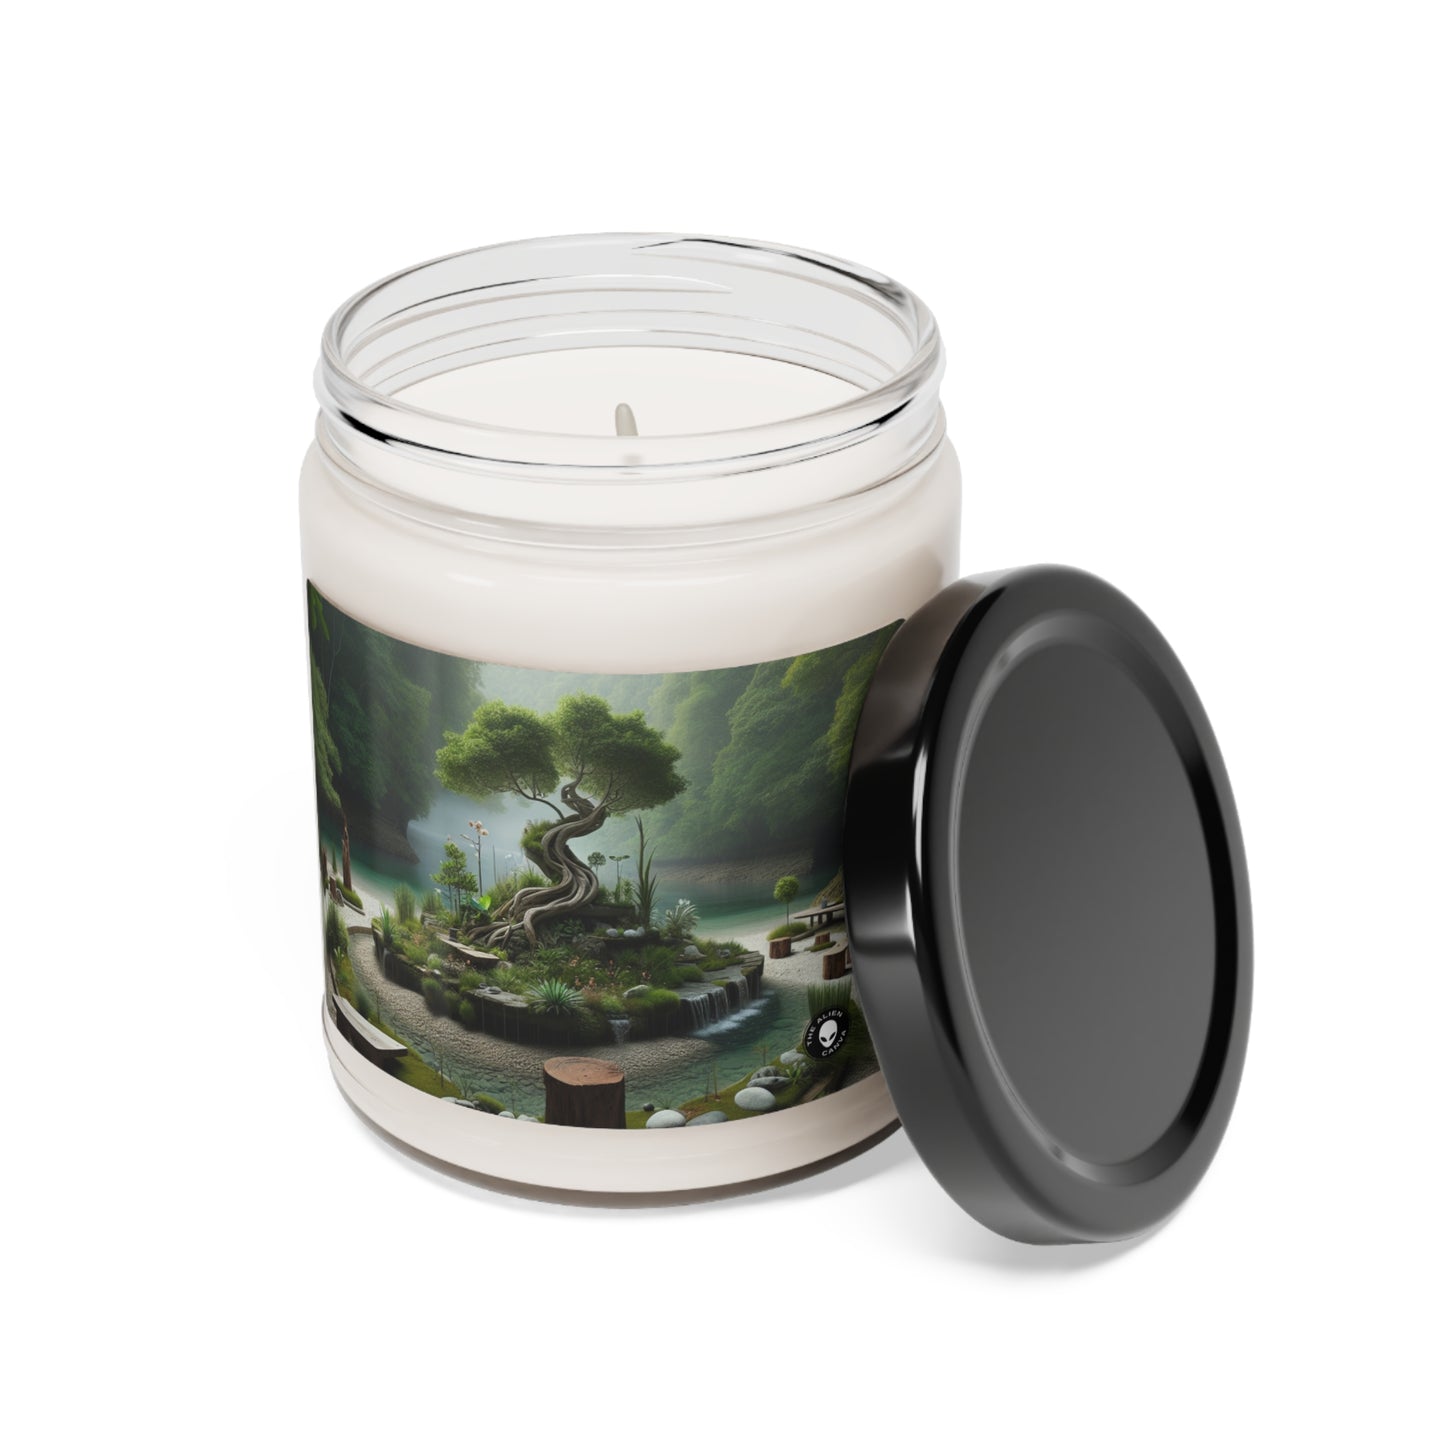 "Renewal Recycled: An Interactive Environmental Sculpture" - The Alien Scented Soy Candle 9oz Environmental Sculpture